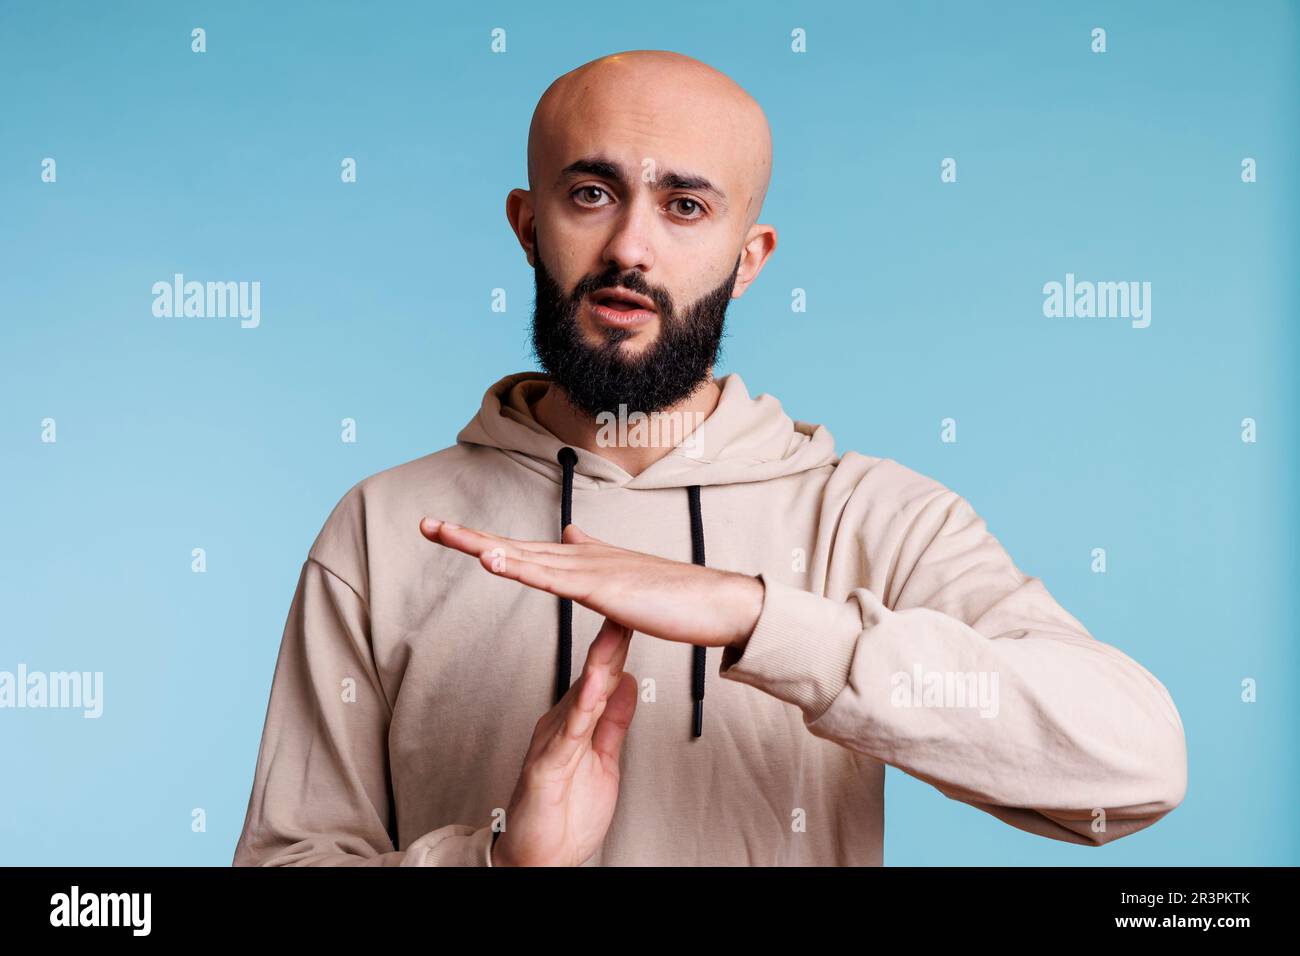 Arab man making time out gesture Stock Photo